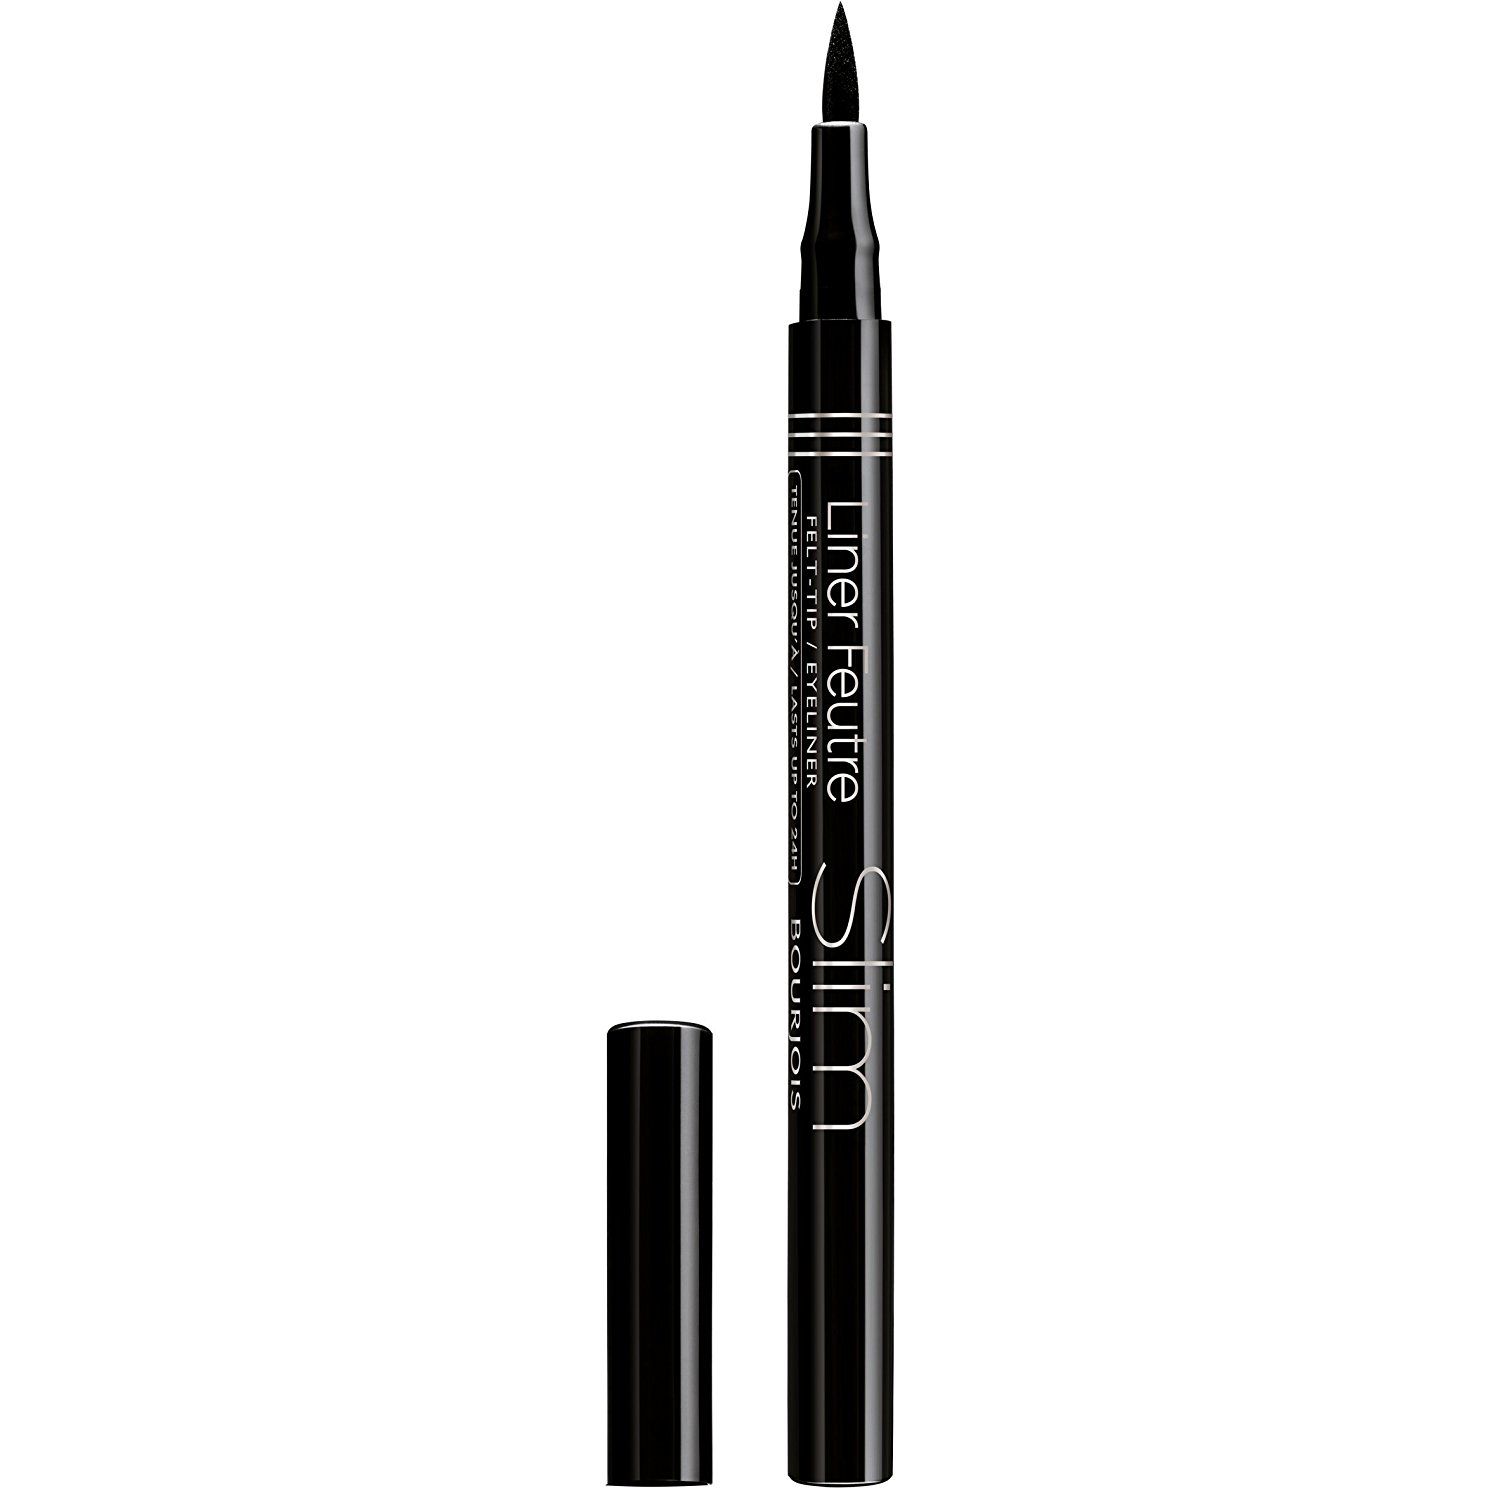 Liner Feutre Slim has a precision felt tip which makes application easy and exact for an expert liner flick that lasts up to 24 hours. Bourjois’ Liner Feutre Slim is an ultra-precise felt-tip eye-liner, perfect for creating an expert liner flick that lasts up to 24 hours.